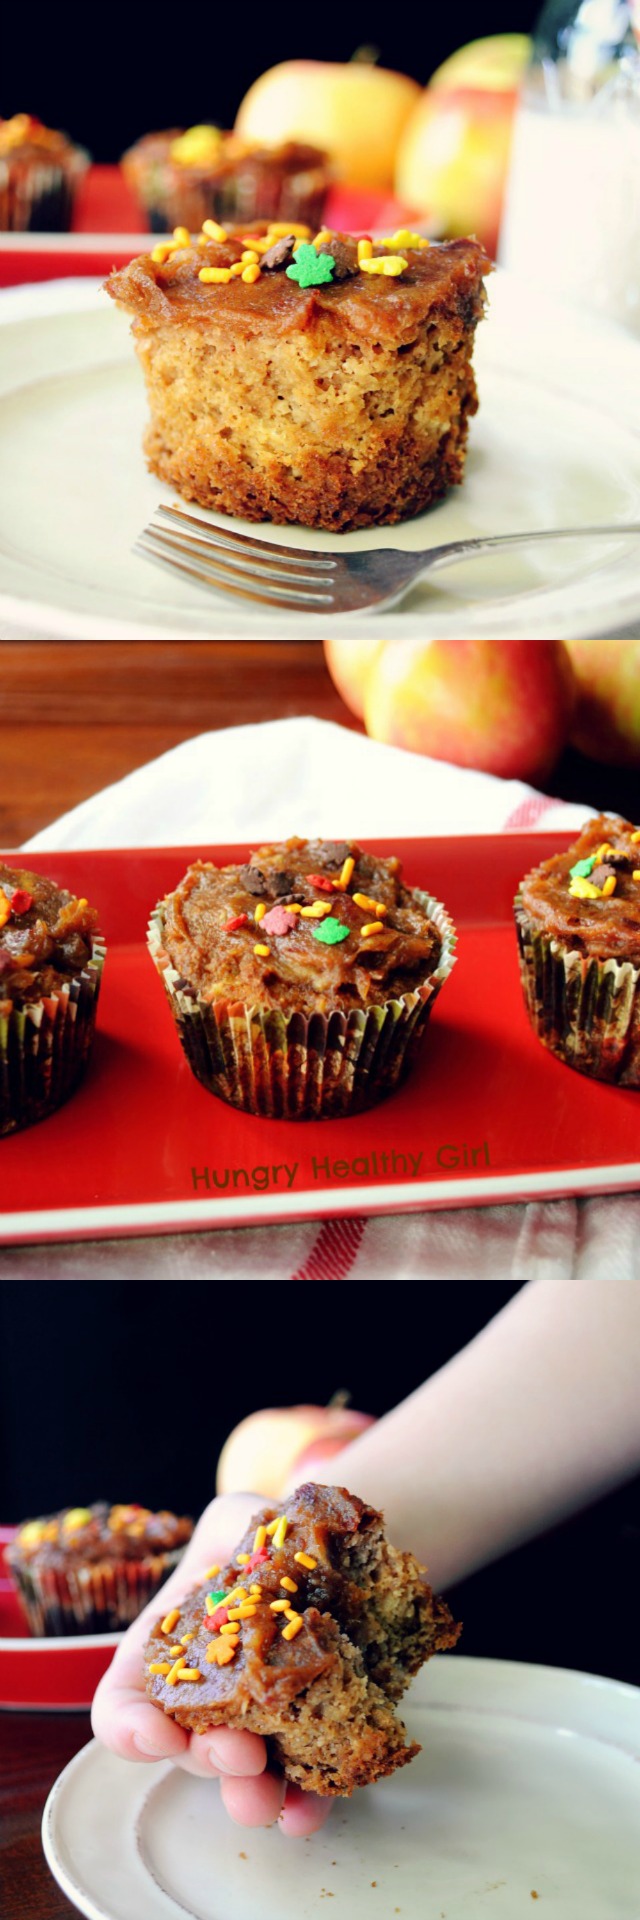 Paleo Gluten-free Caramel Apple Cupcakes- two favorite Fall flavors come together perfectly in these super clean and scrumptious cupcakes!